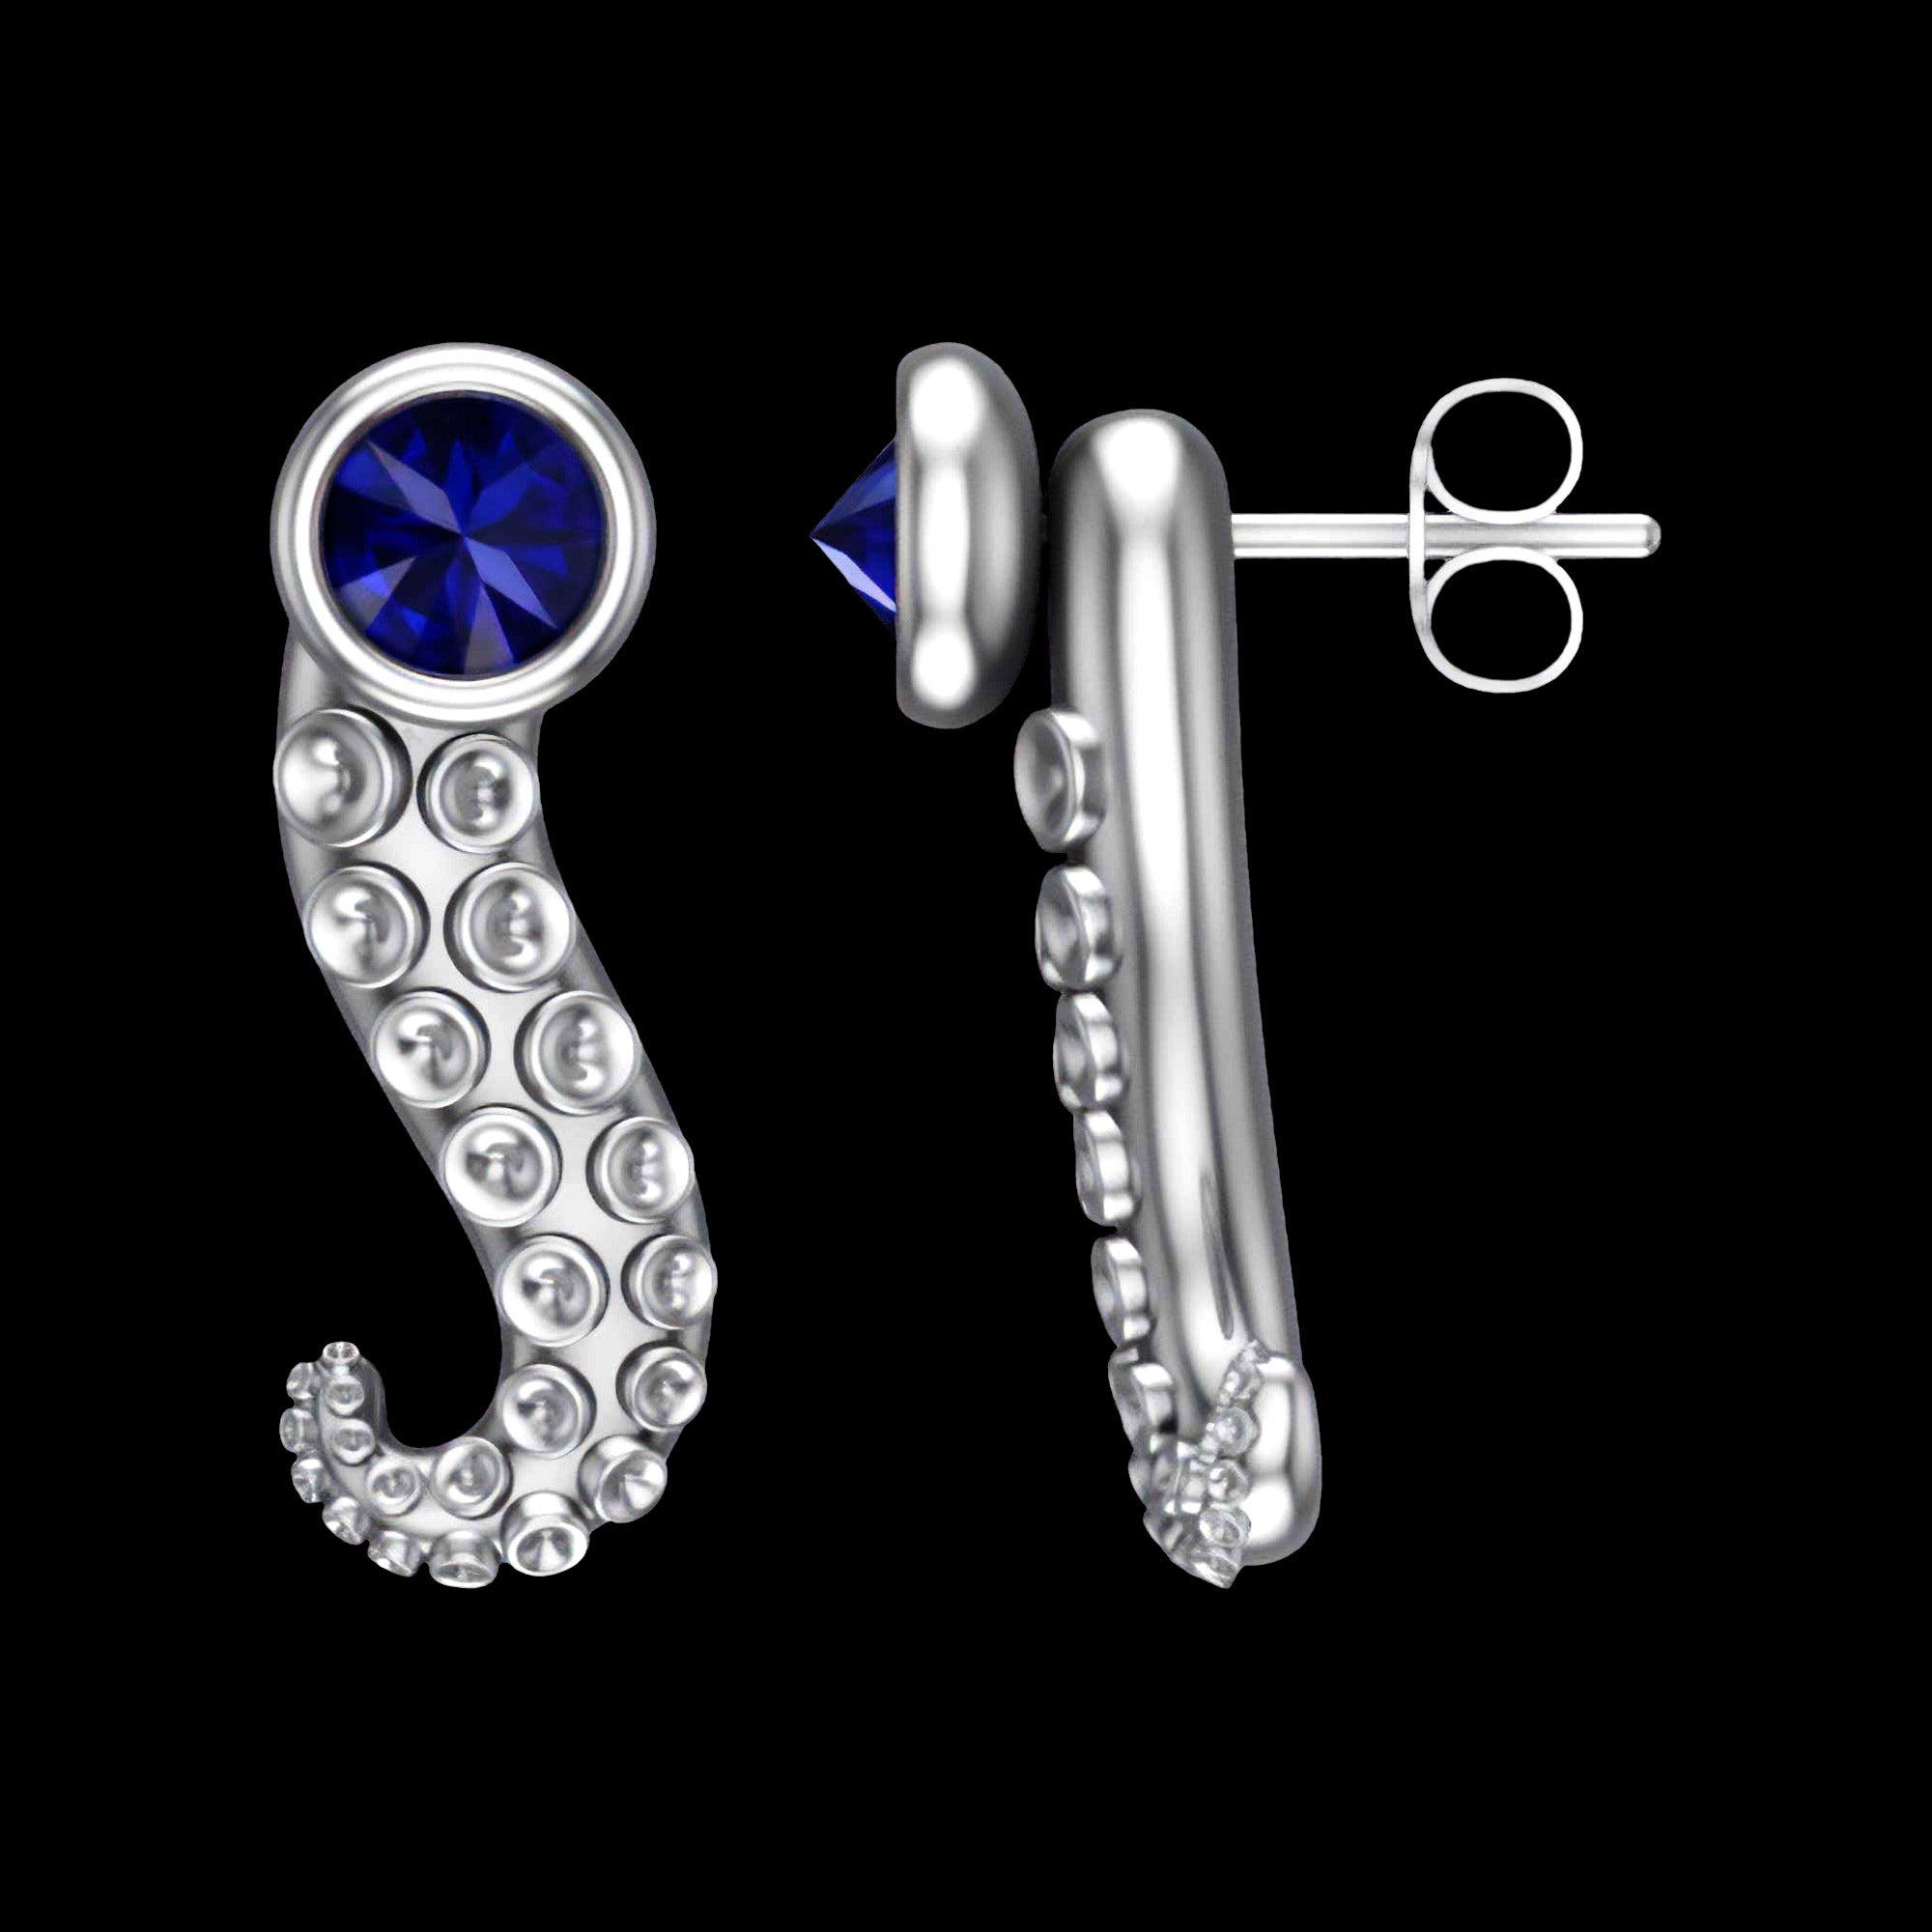 Sterling Silver Tentacle modular earrings with Cz diamond